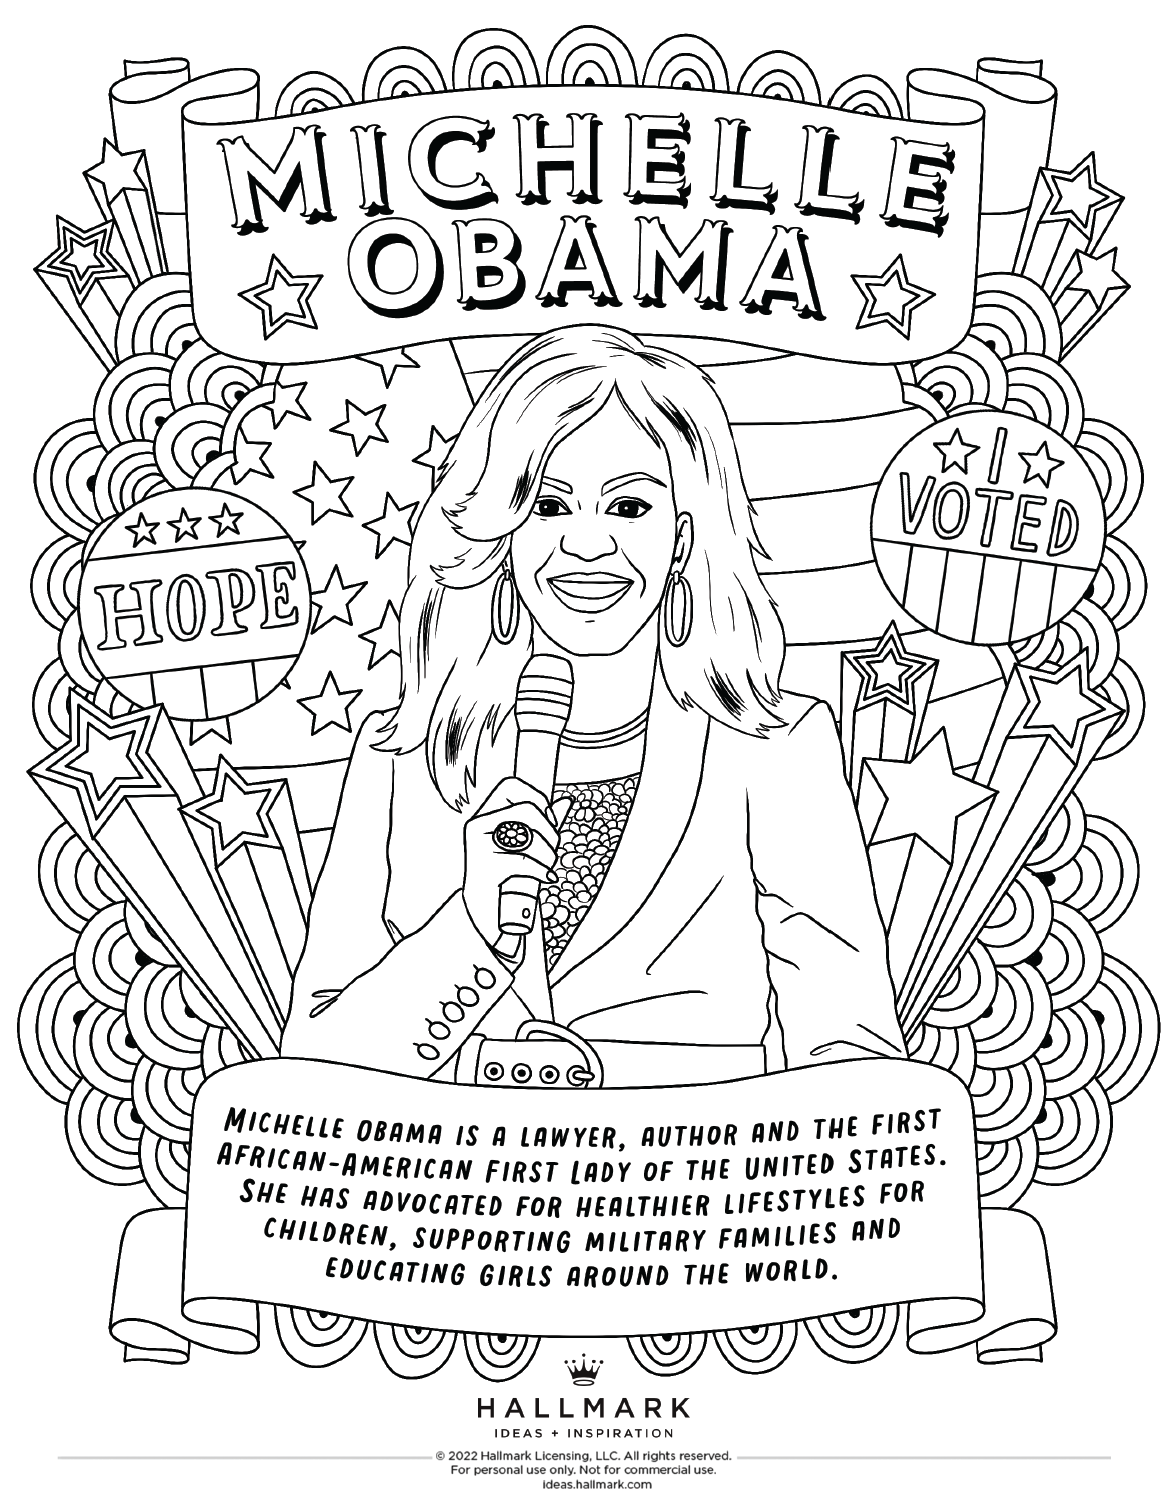 Free black history month coloring pages to celebrate with the family or in the classroom inspiration